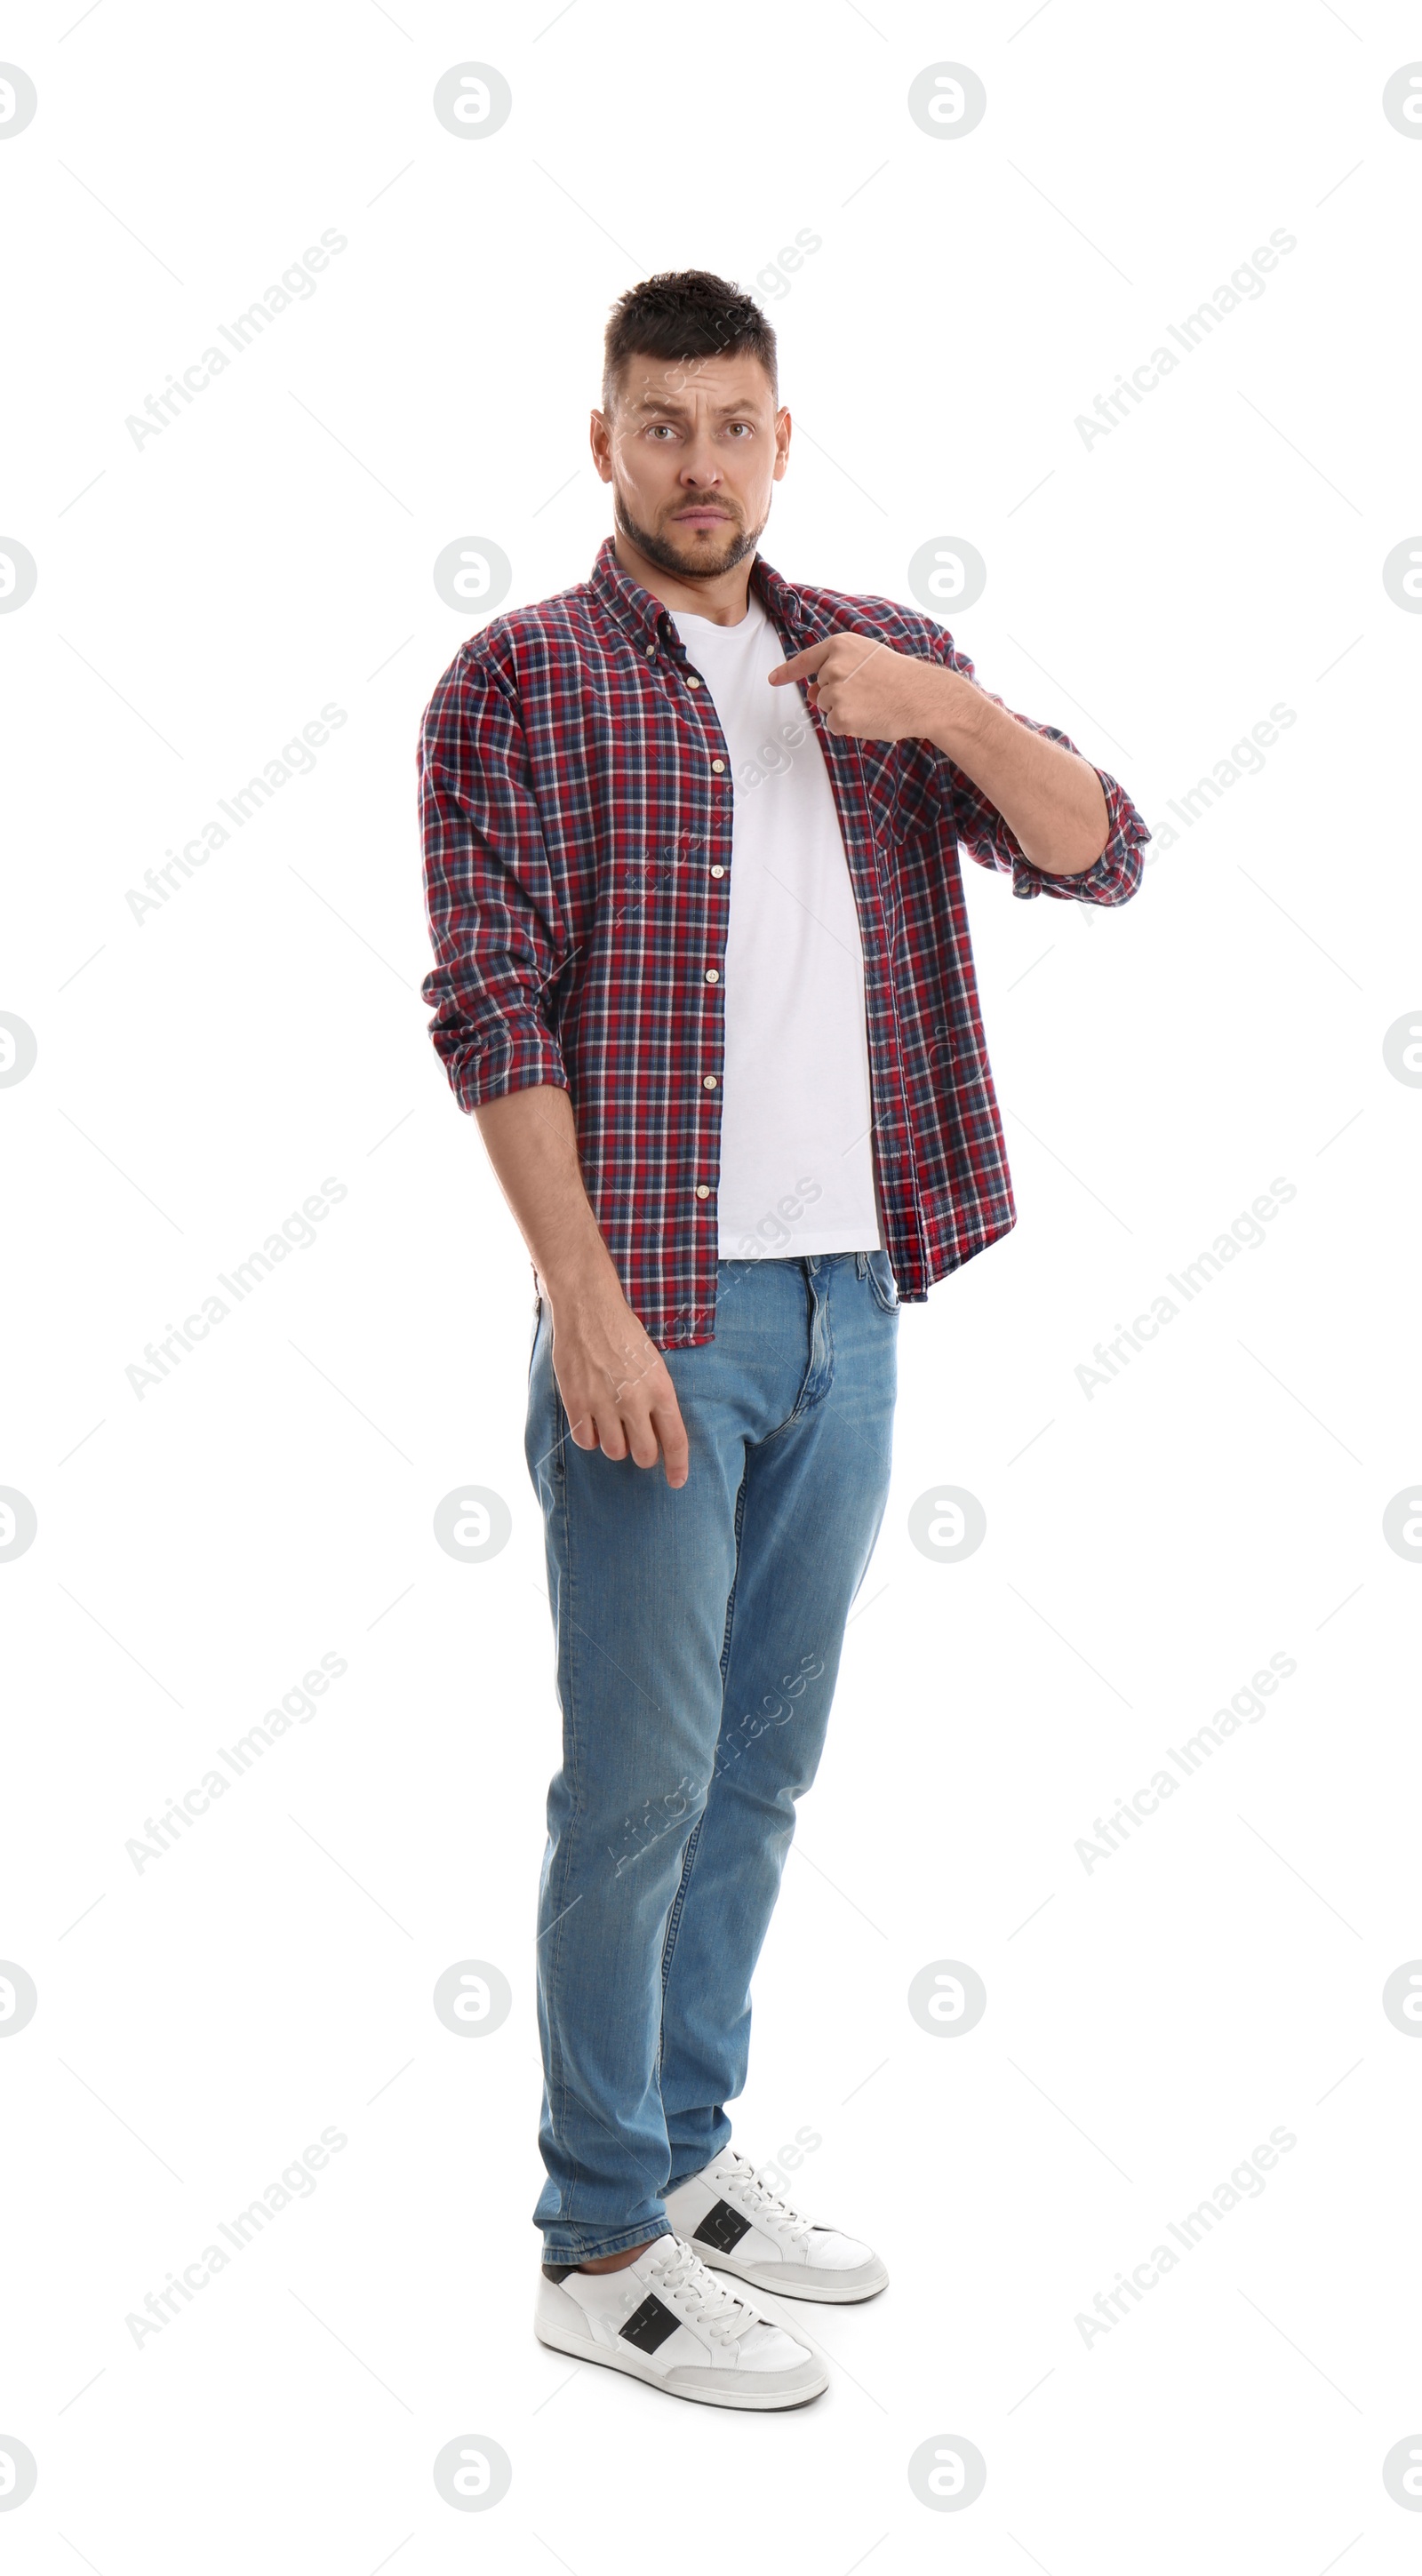 Photo of Emotional man pointing at himself on white background